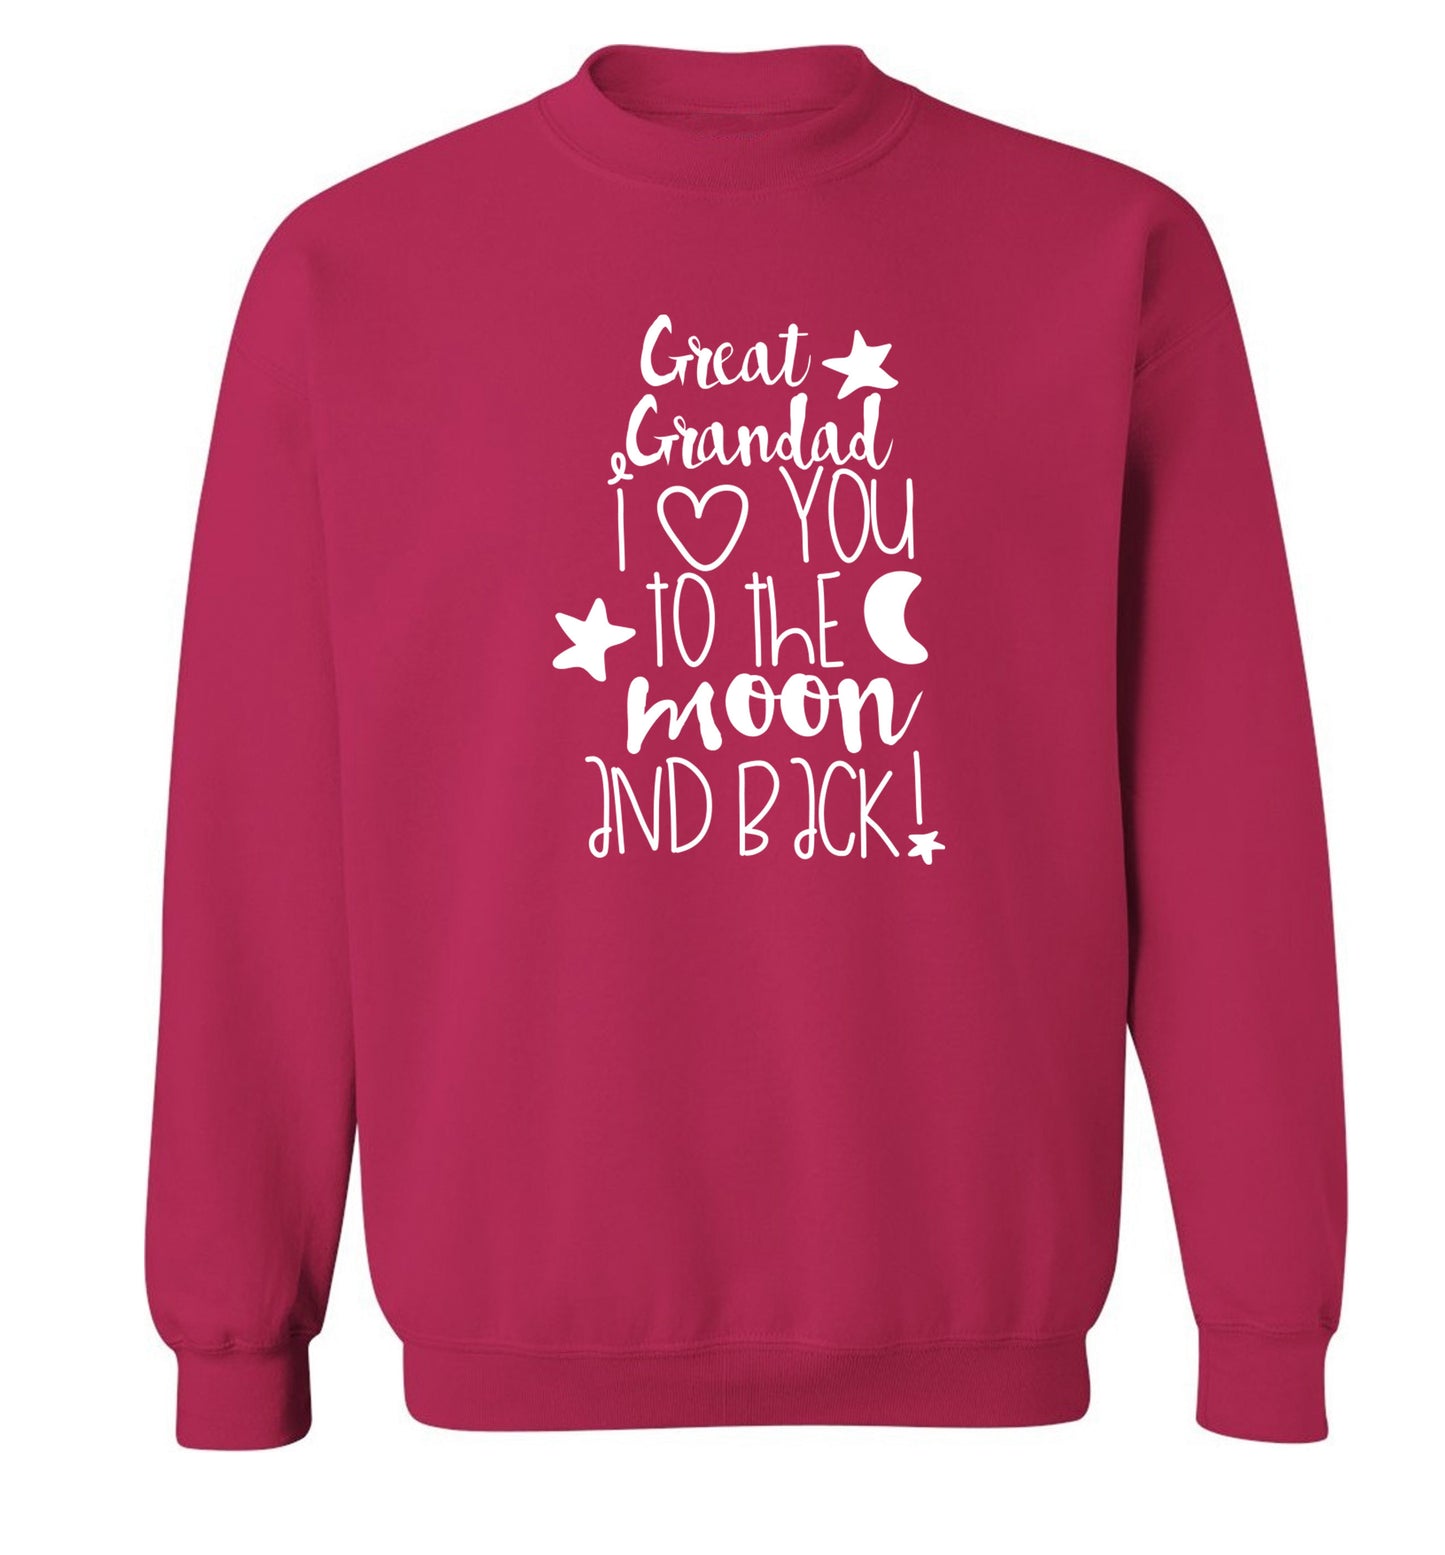 Great Grandad I love you to the moon and back Adult's unisex pink  sweater XL